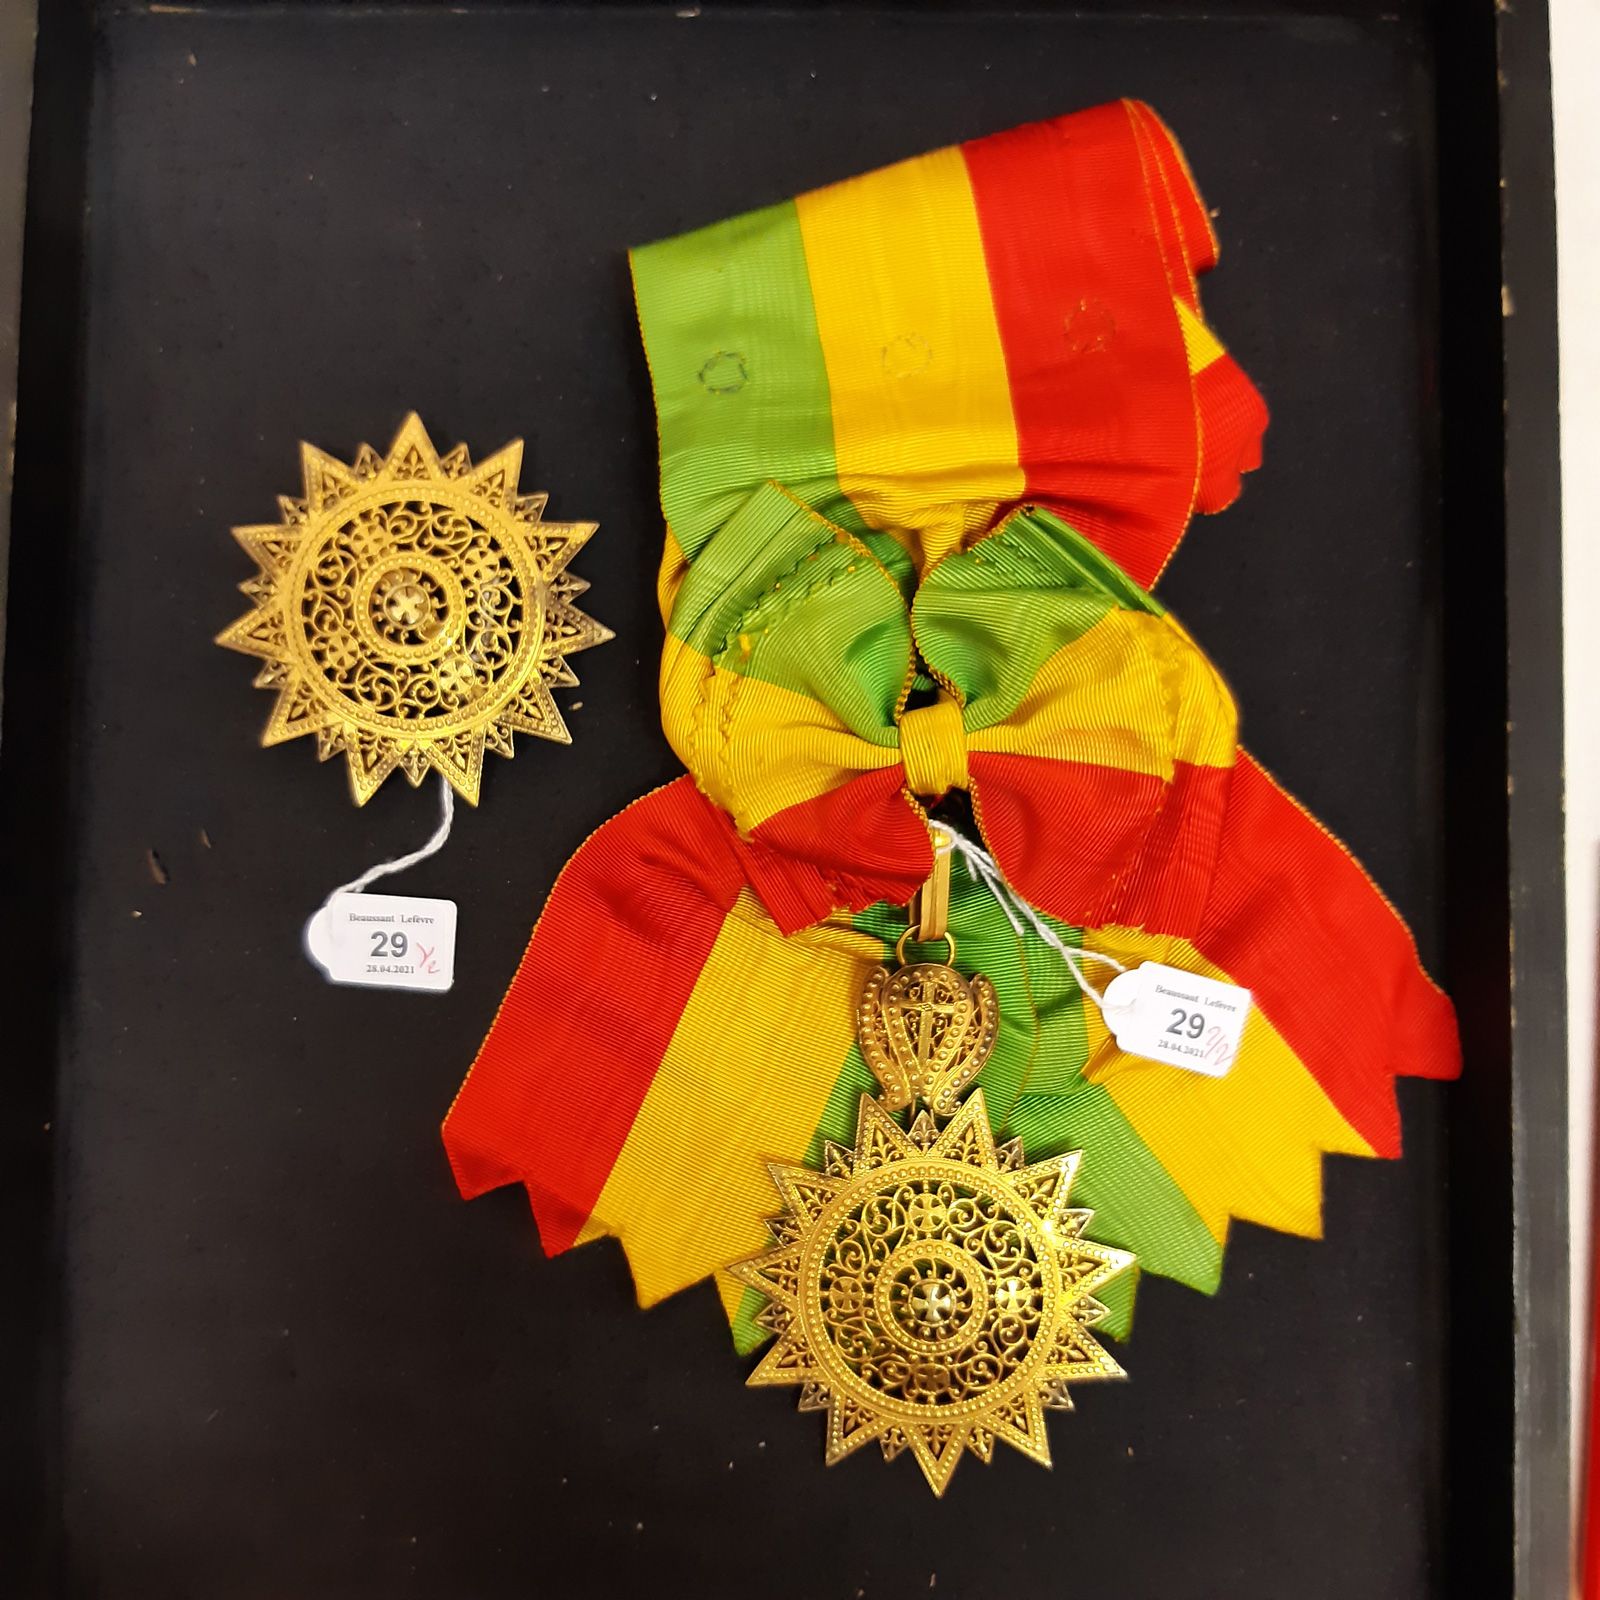 Null Ethiopia - Order of the Star of Ethiopia, founded in 1879 by Menelik II Kin&hellip;